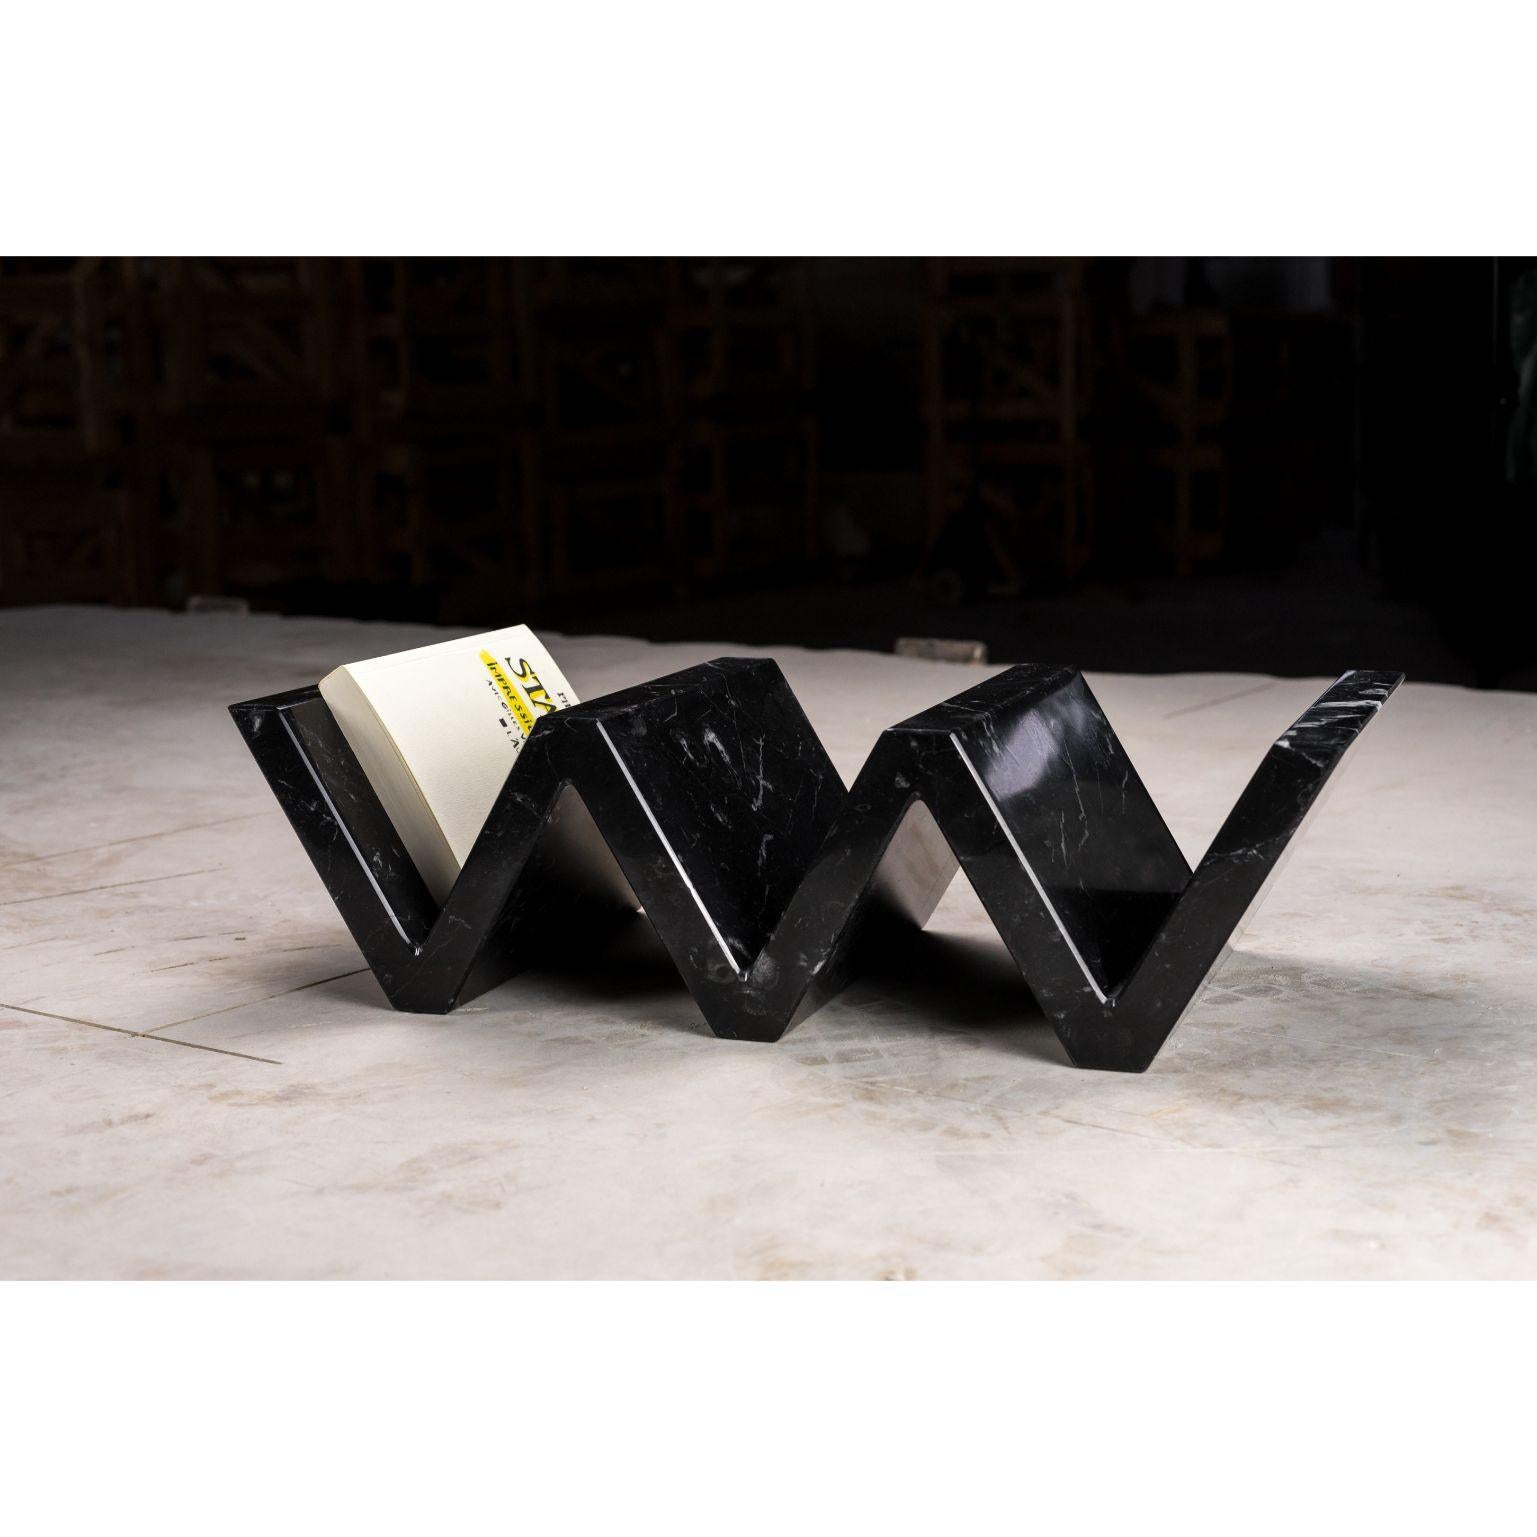 Serpentine marble book holder - small by Essenzia
Materials: Nero marquina
Dimensions: 51 x 22 x 14 cm

Also available: Carrara, India green, and large size 

Serpentine it’s an innovating solution with multiple purposes. It can be used as a